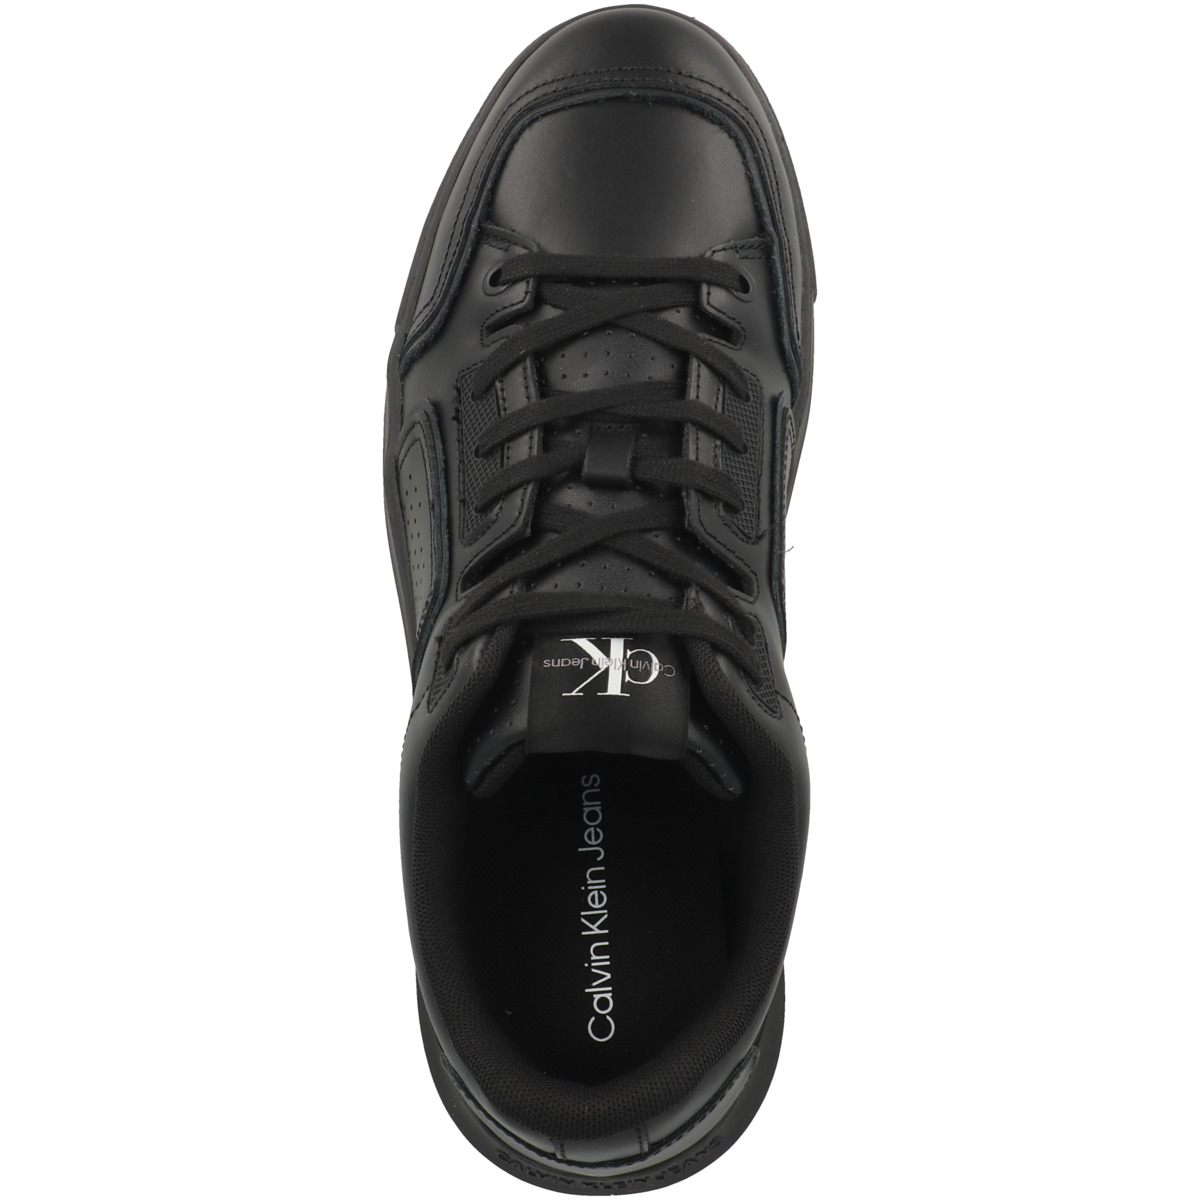 Calvin Klein Jeans Chunky Cups Laceup Low Lth-Pu Sneaker schwarz